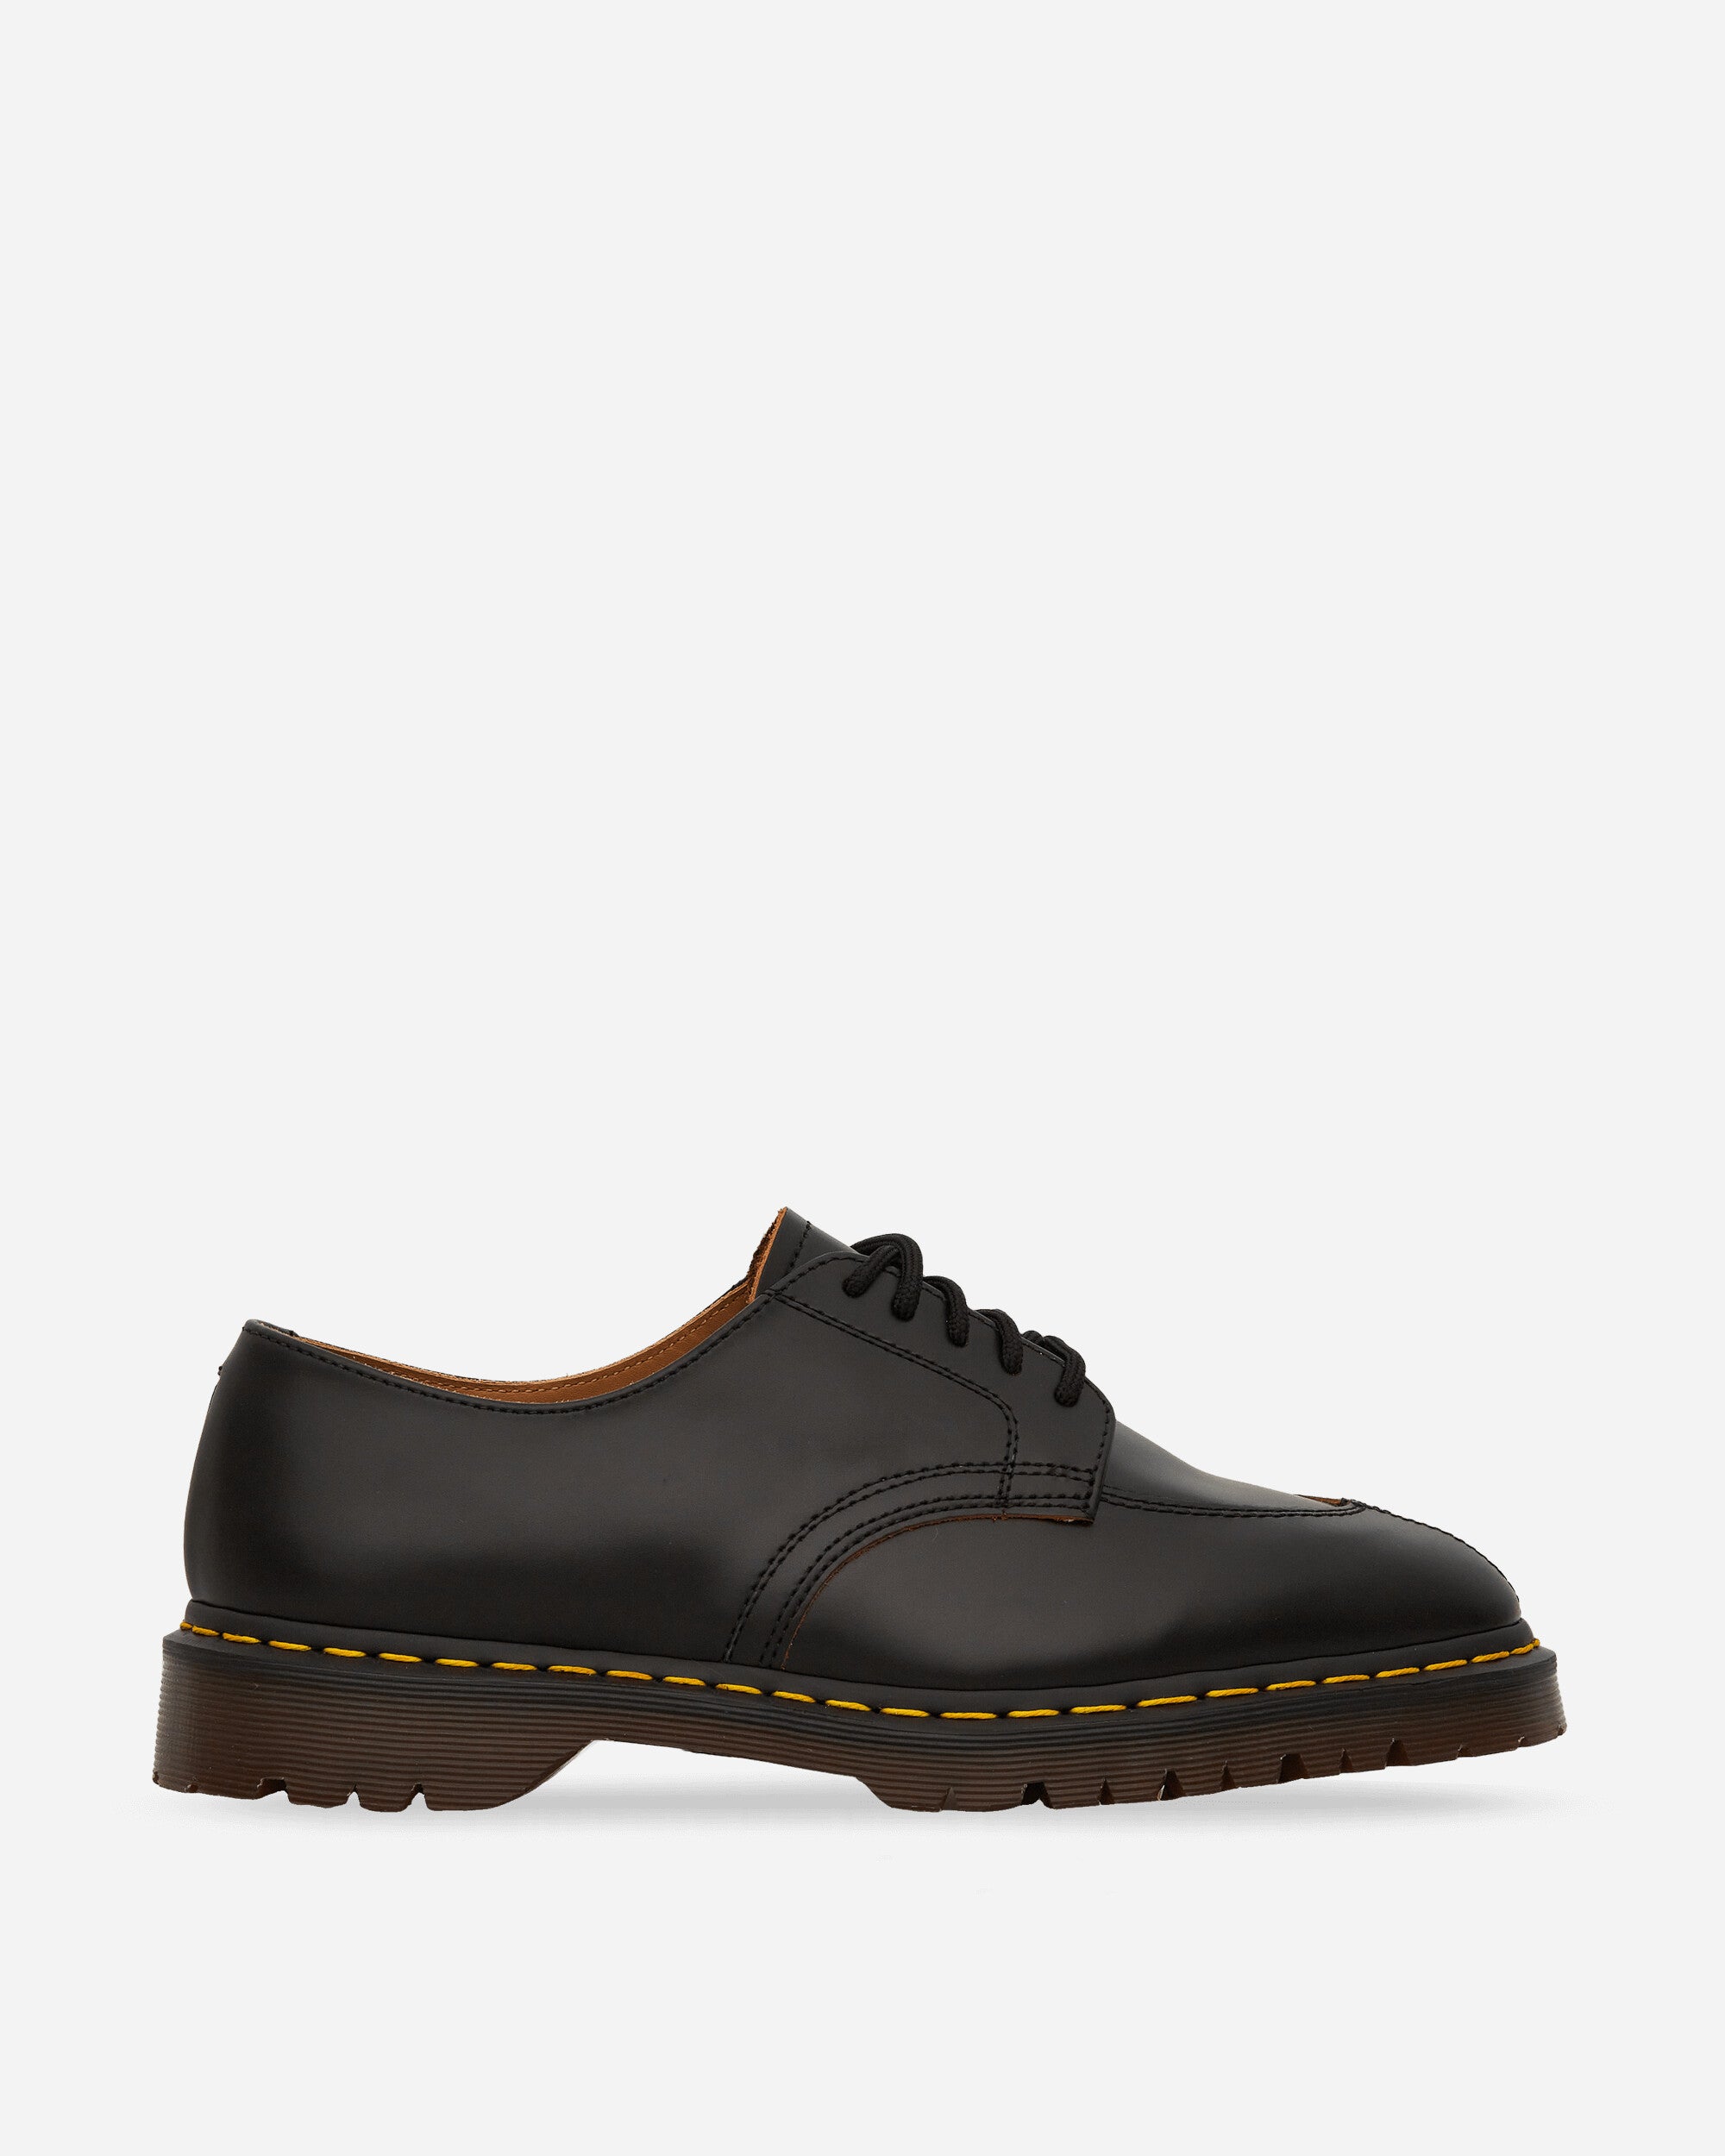 2046 Vintage Smooth Leather Oxford Shoes Black